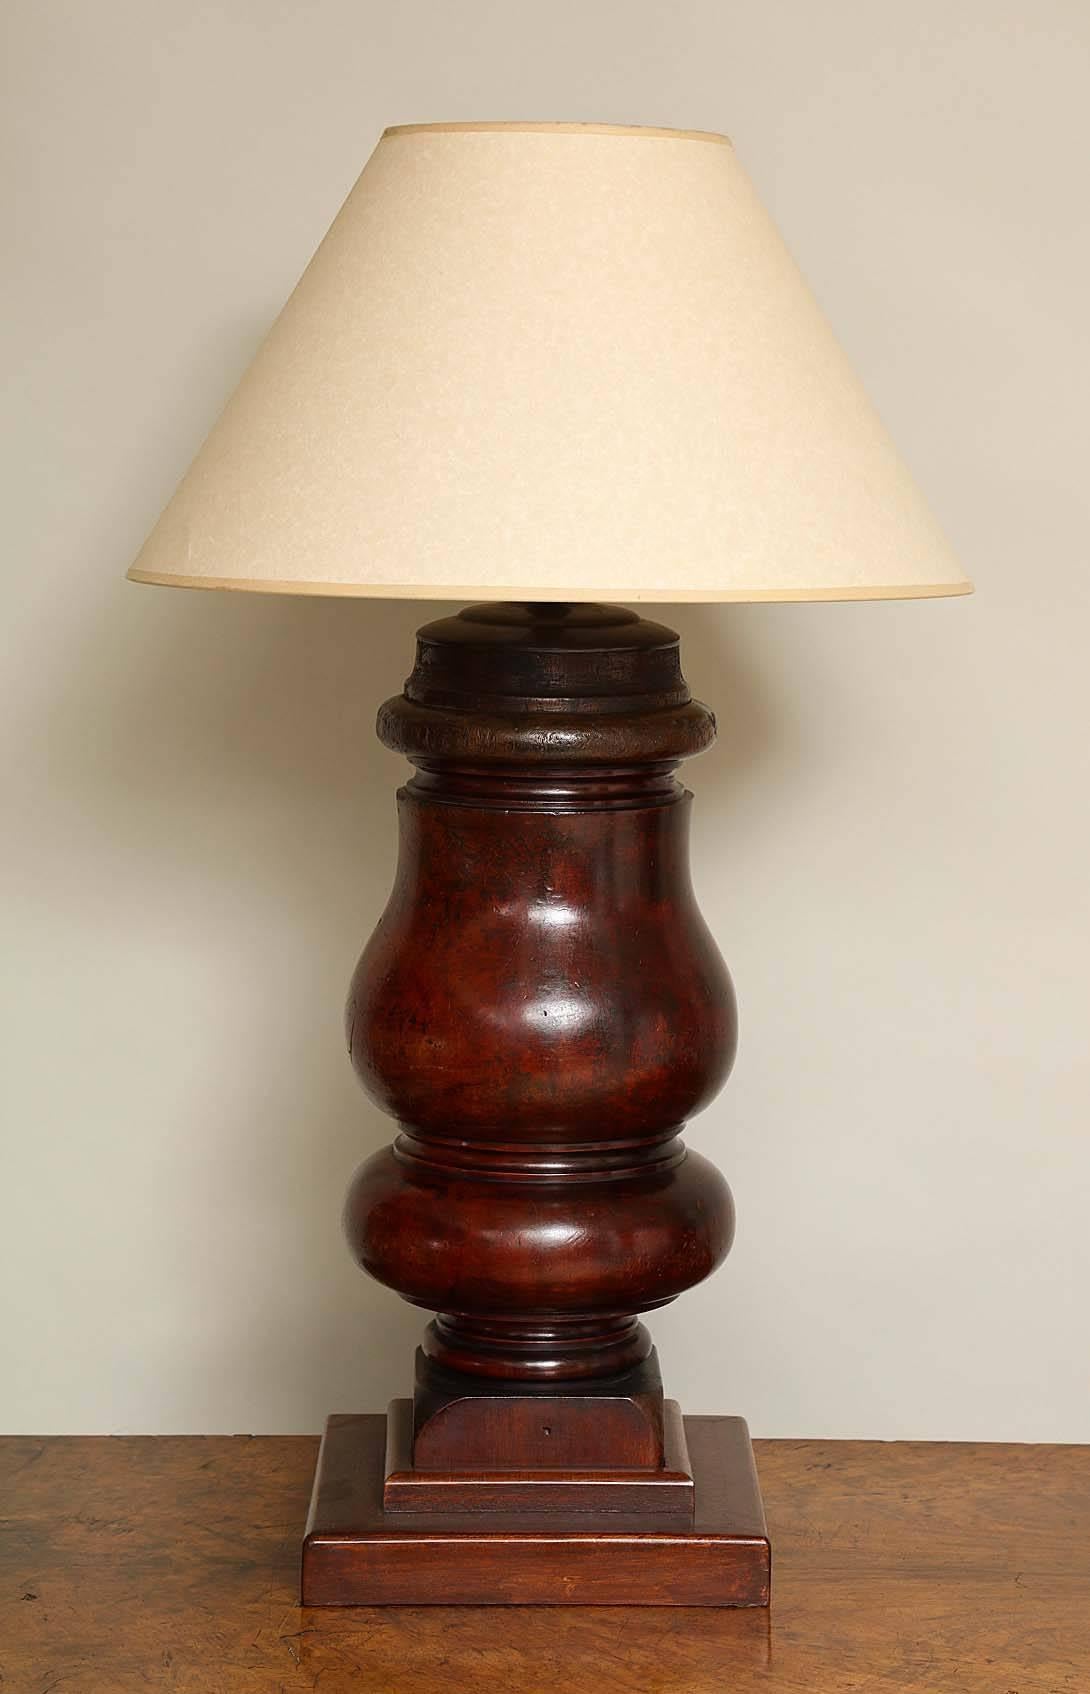 Great pair of William IV mahogany turned billiard table legs, now as lamps, turned from single blocks of richly colored timber and having great patina, on new plinths.